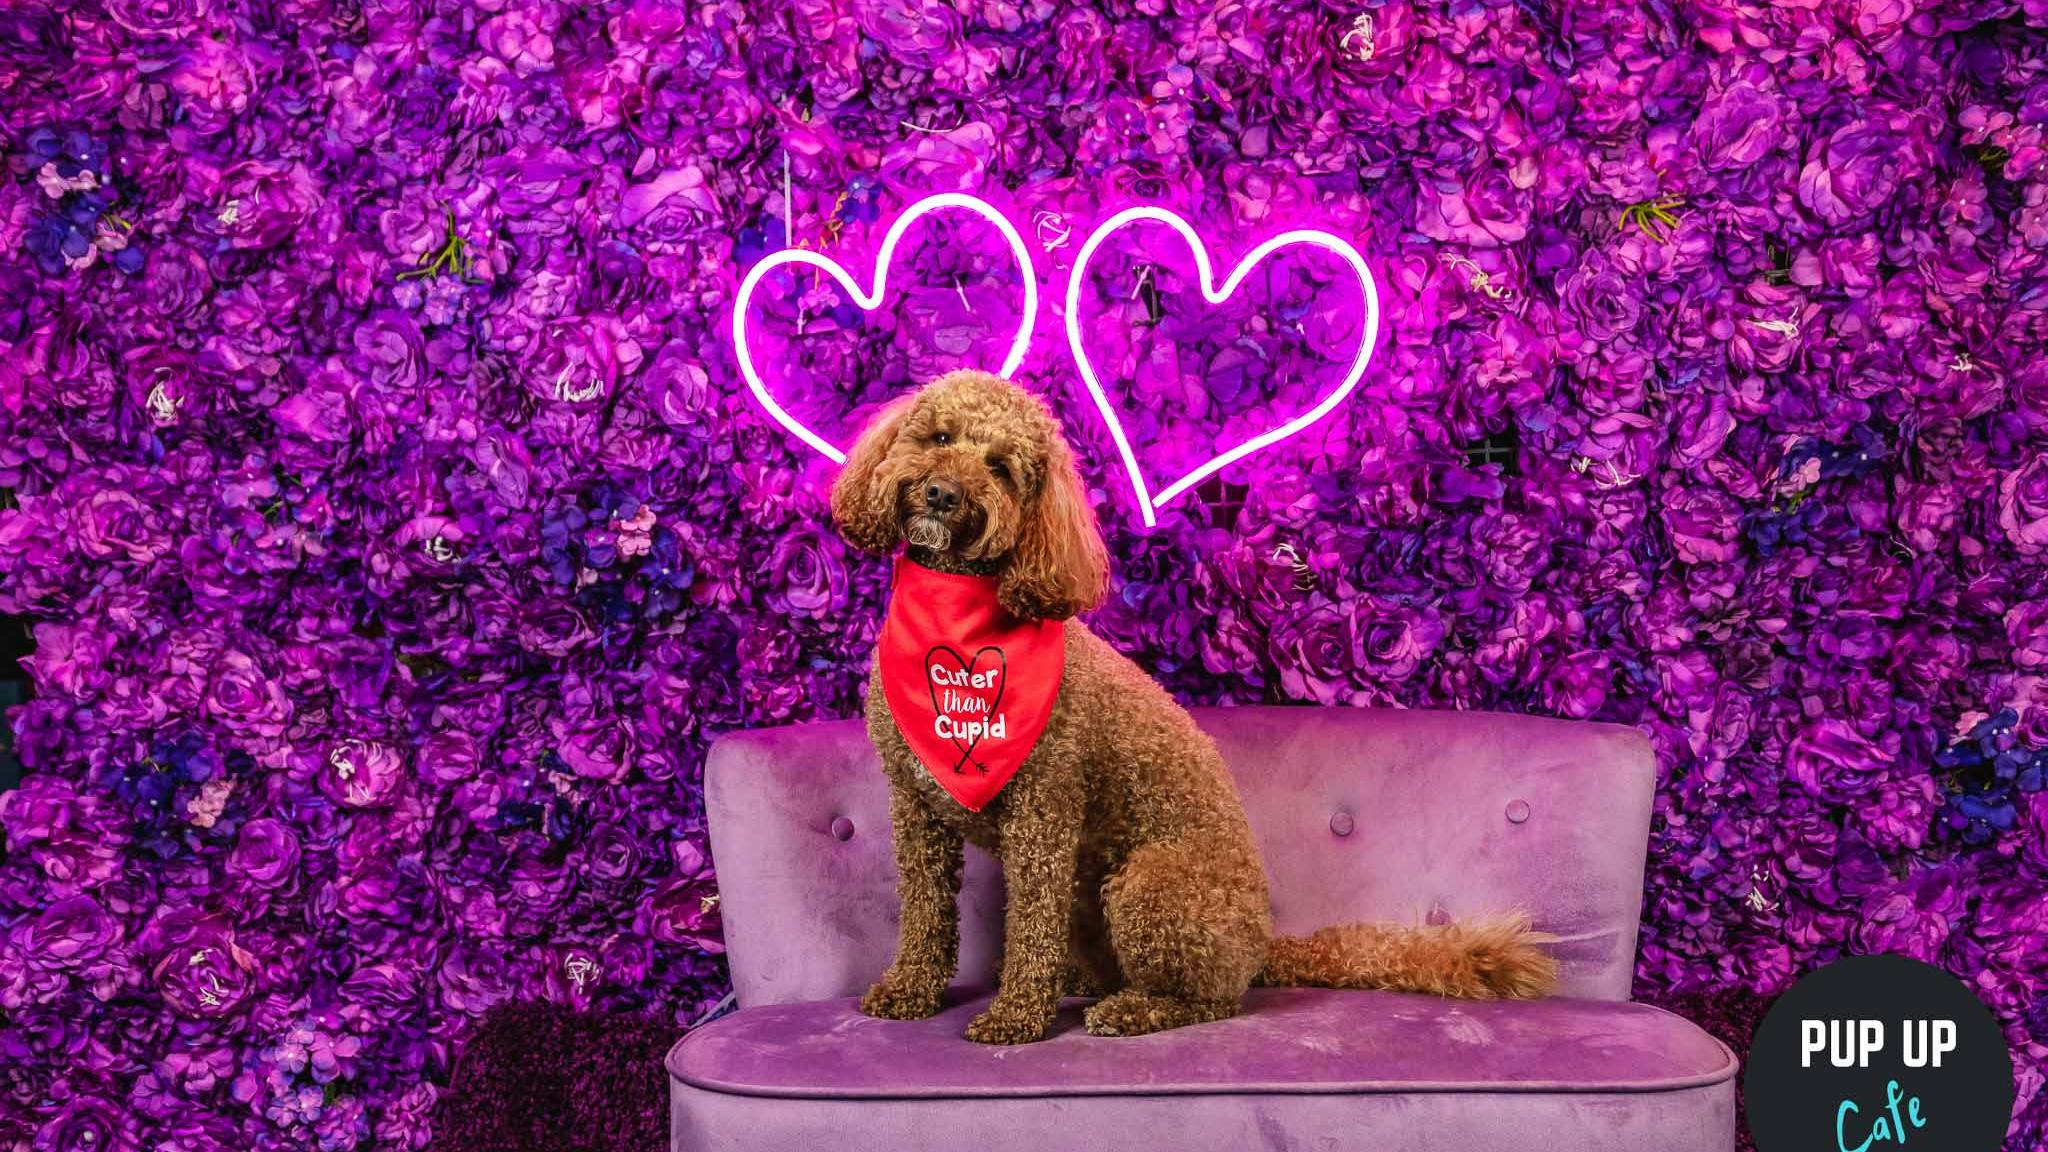 Fall In Love At The Valentine’s Pup Up Cafe In Manchester